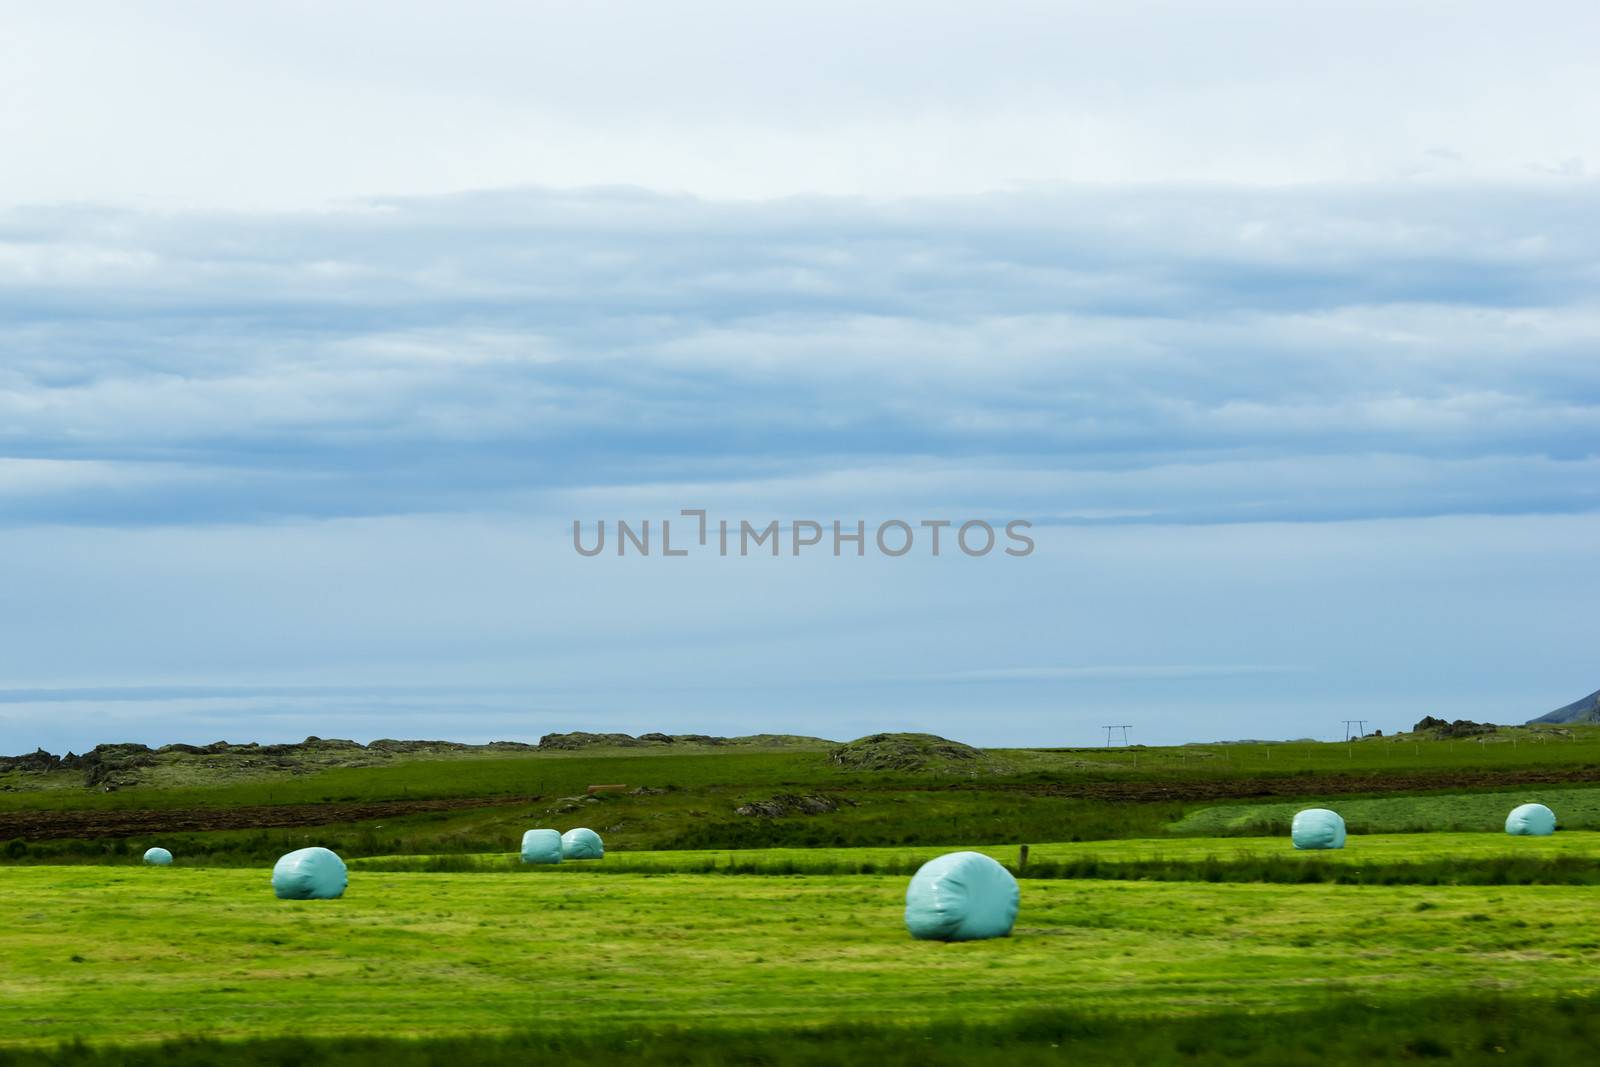 Icelandic Rural Landscape. Hay bales in white plastic on the mea by Tetyana